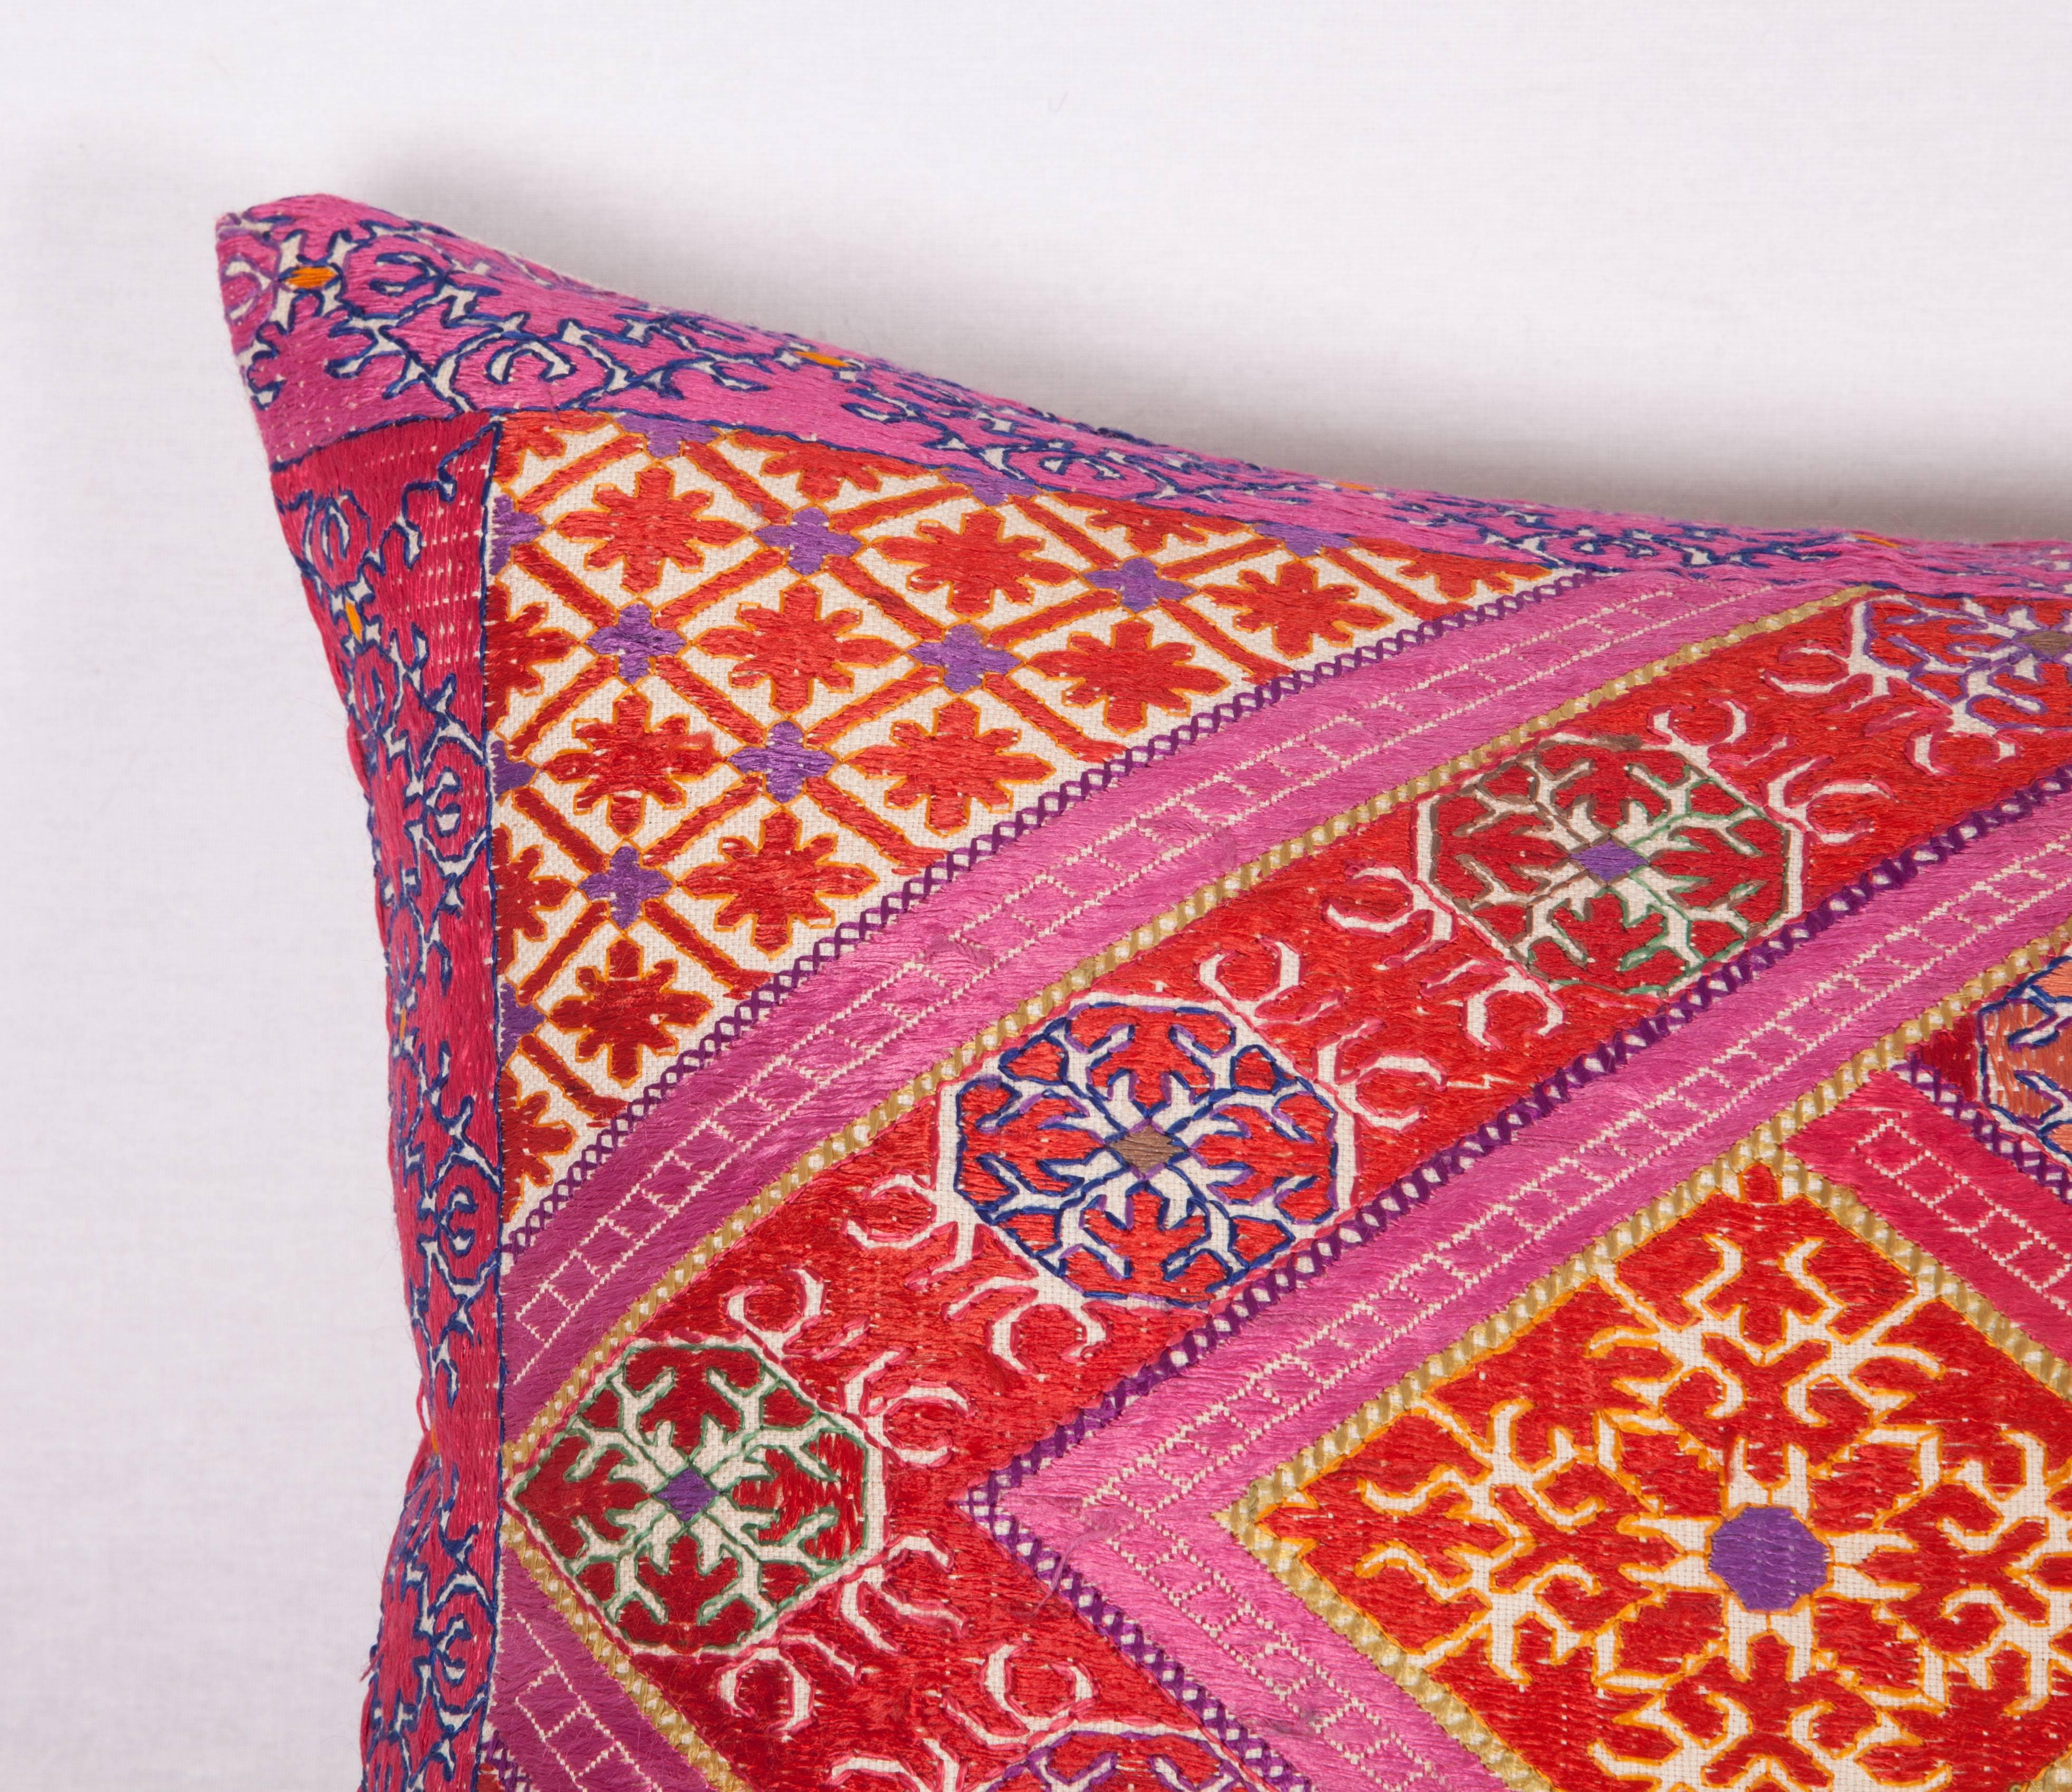 Suzani Pillow Made Out of a Mid-20th Century Swat Embroidery